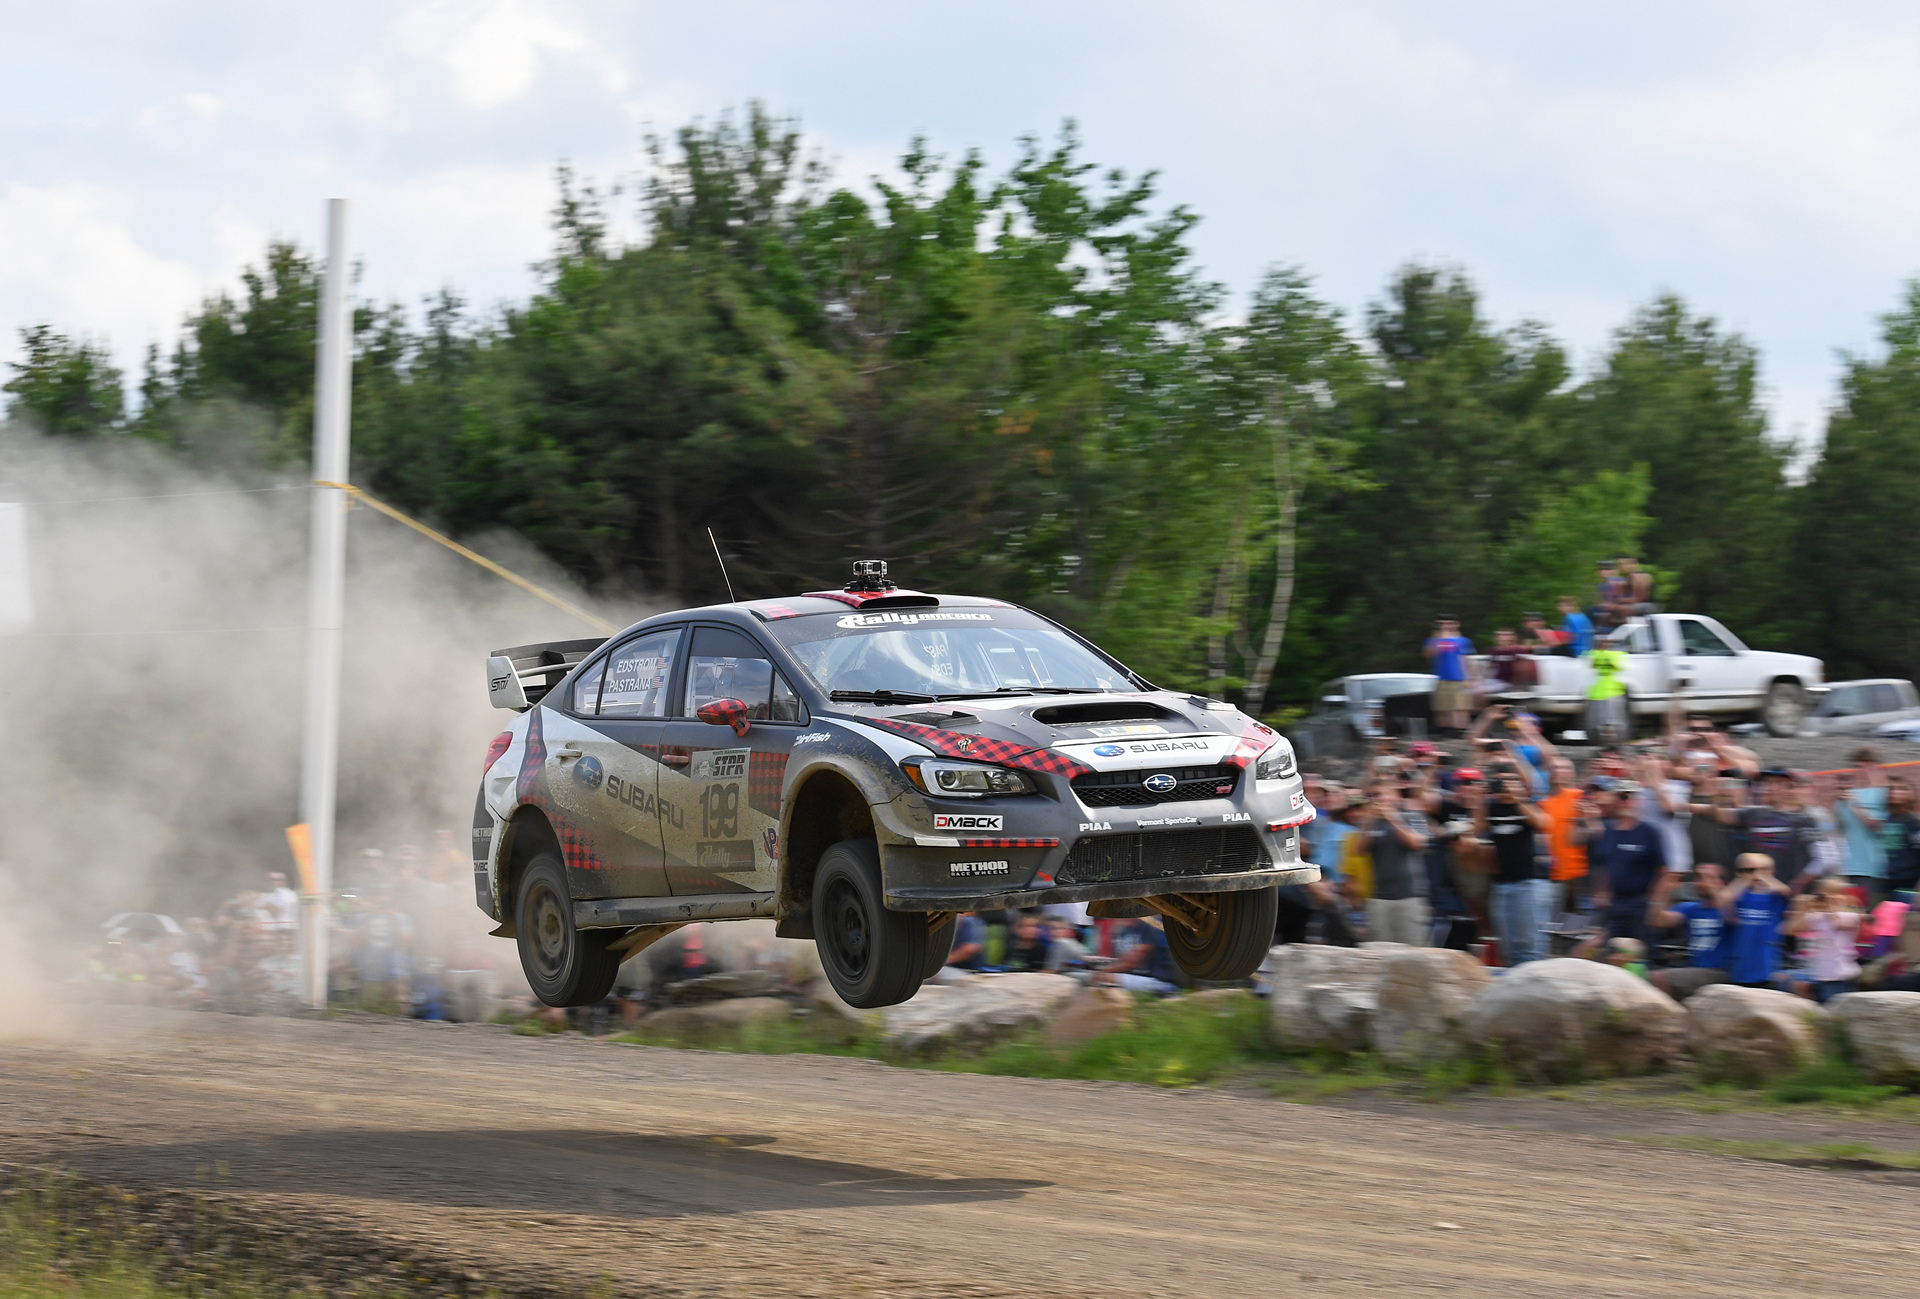 Subaru driver Travis Pastrana showed strong pace despite retiring early from the rally from an off © Fuji Heavy Industries, Ltd.